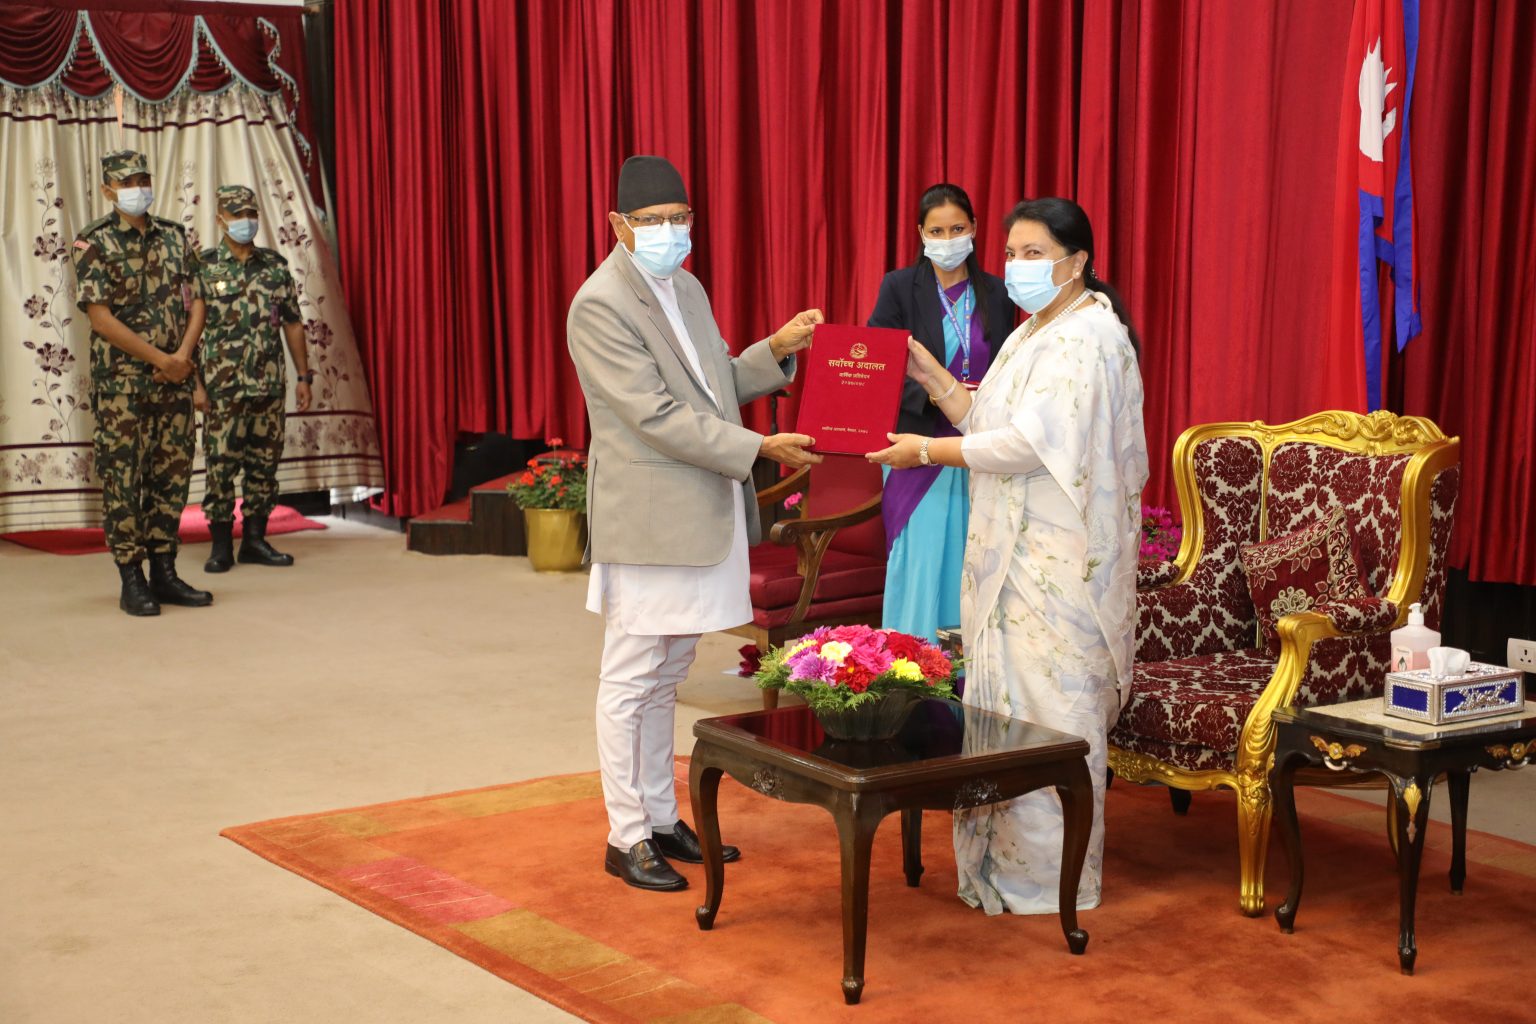 Annual report of SC submitted to President Bhandari